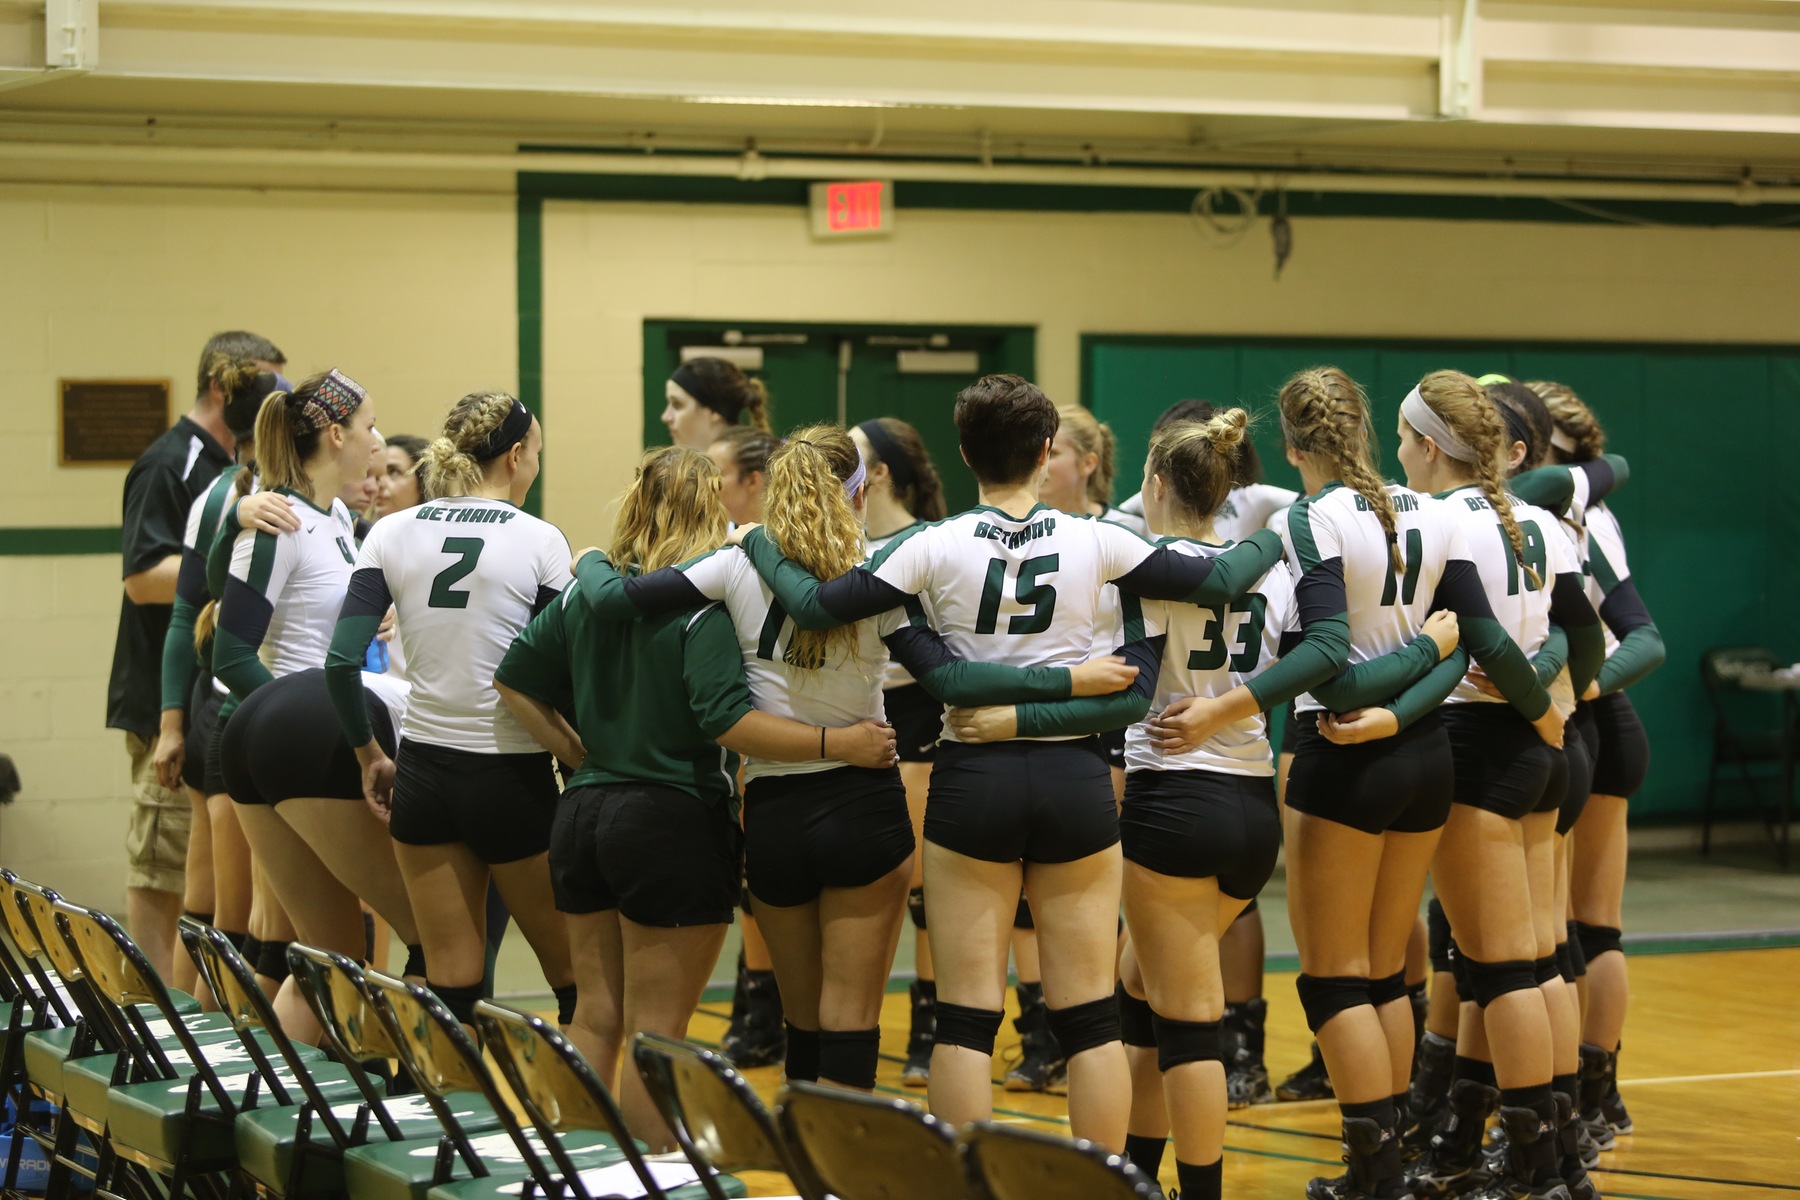 Defending PAC Champion Bison picked second in league poll